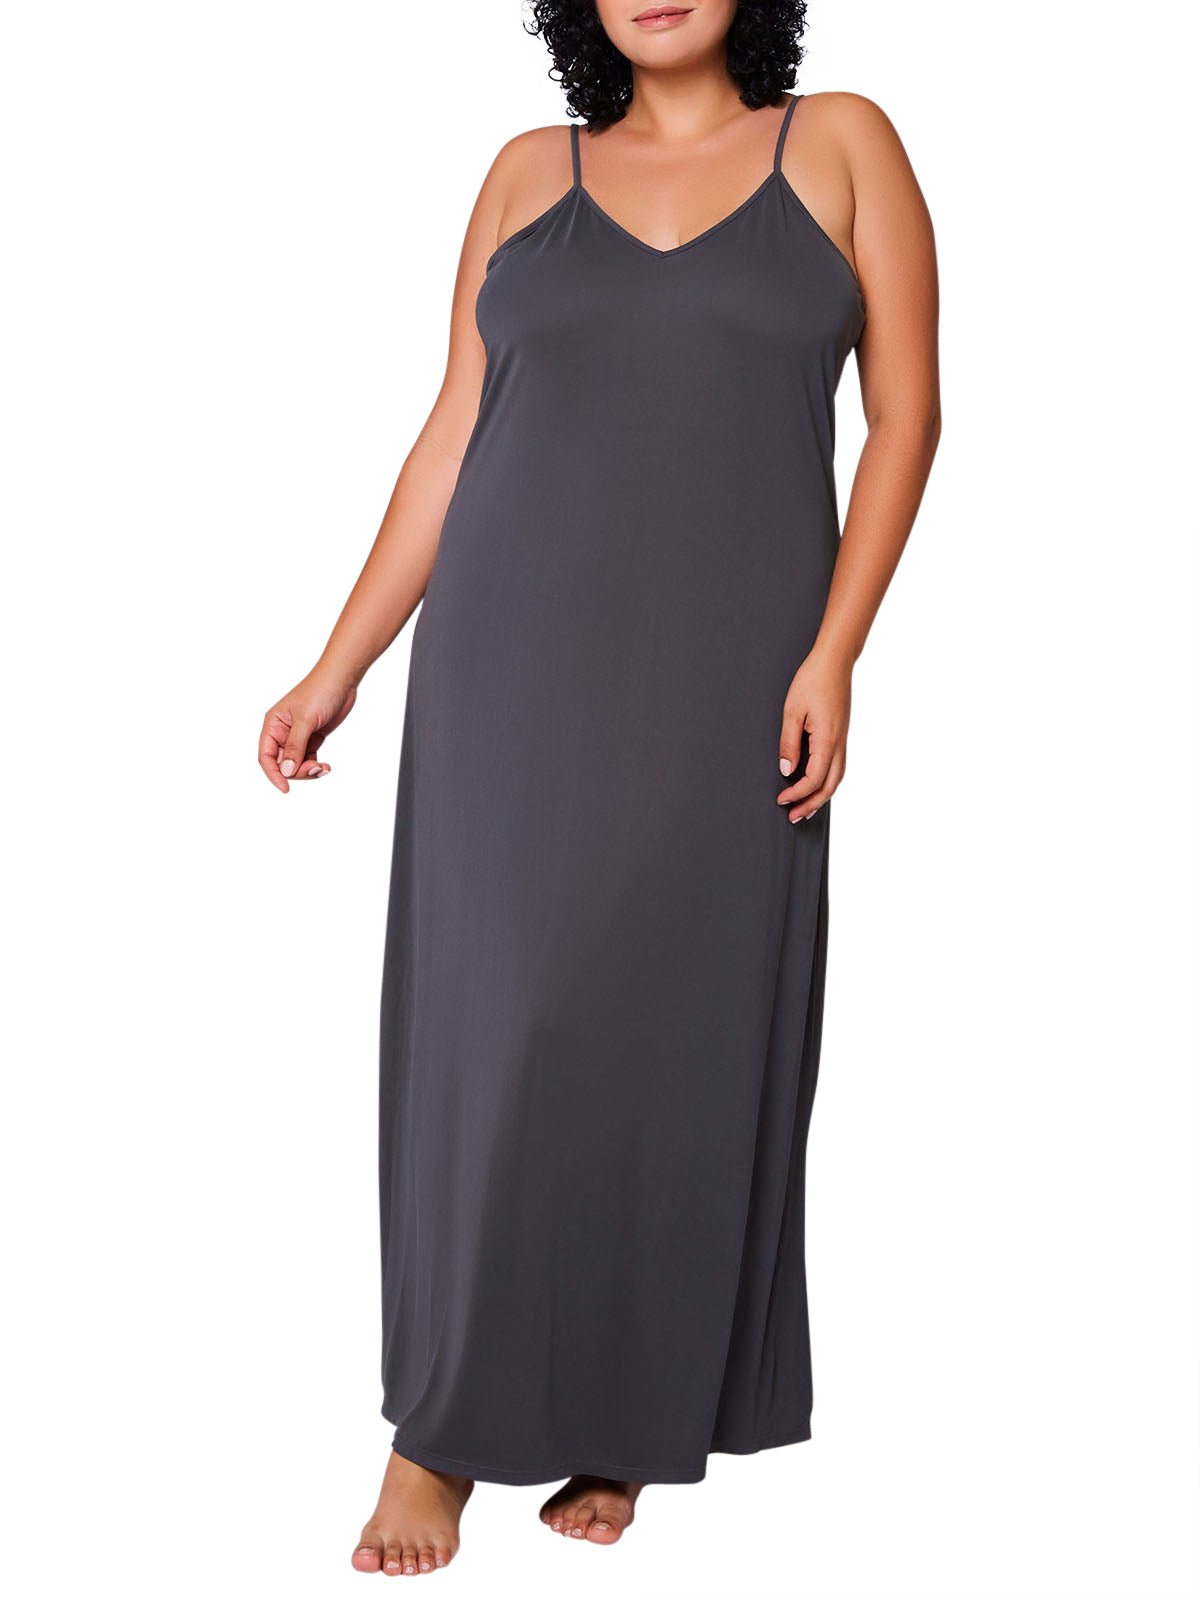 iCollection Gown Jasper Plus Size Gown